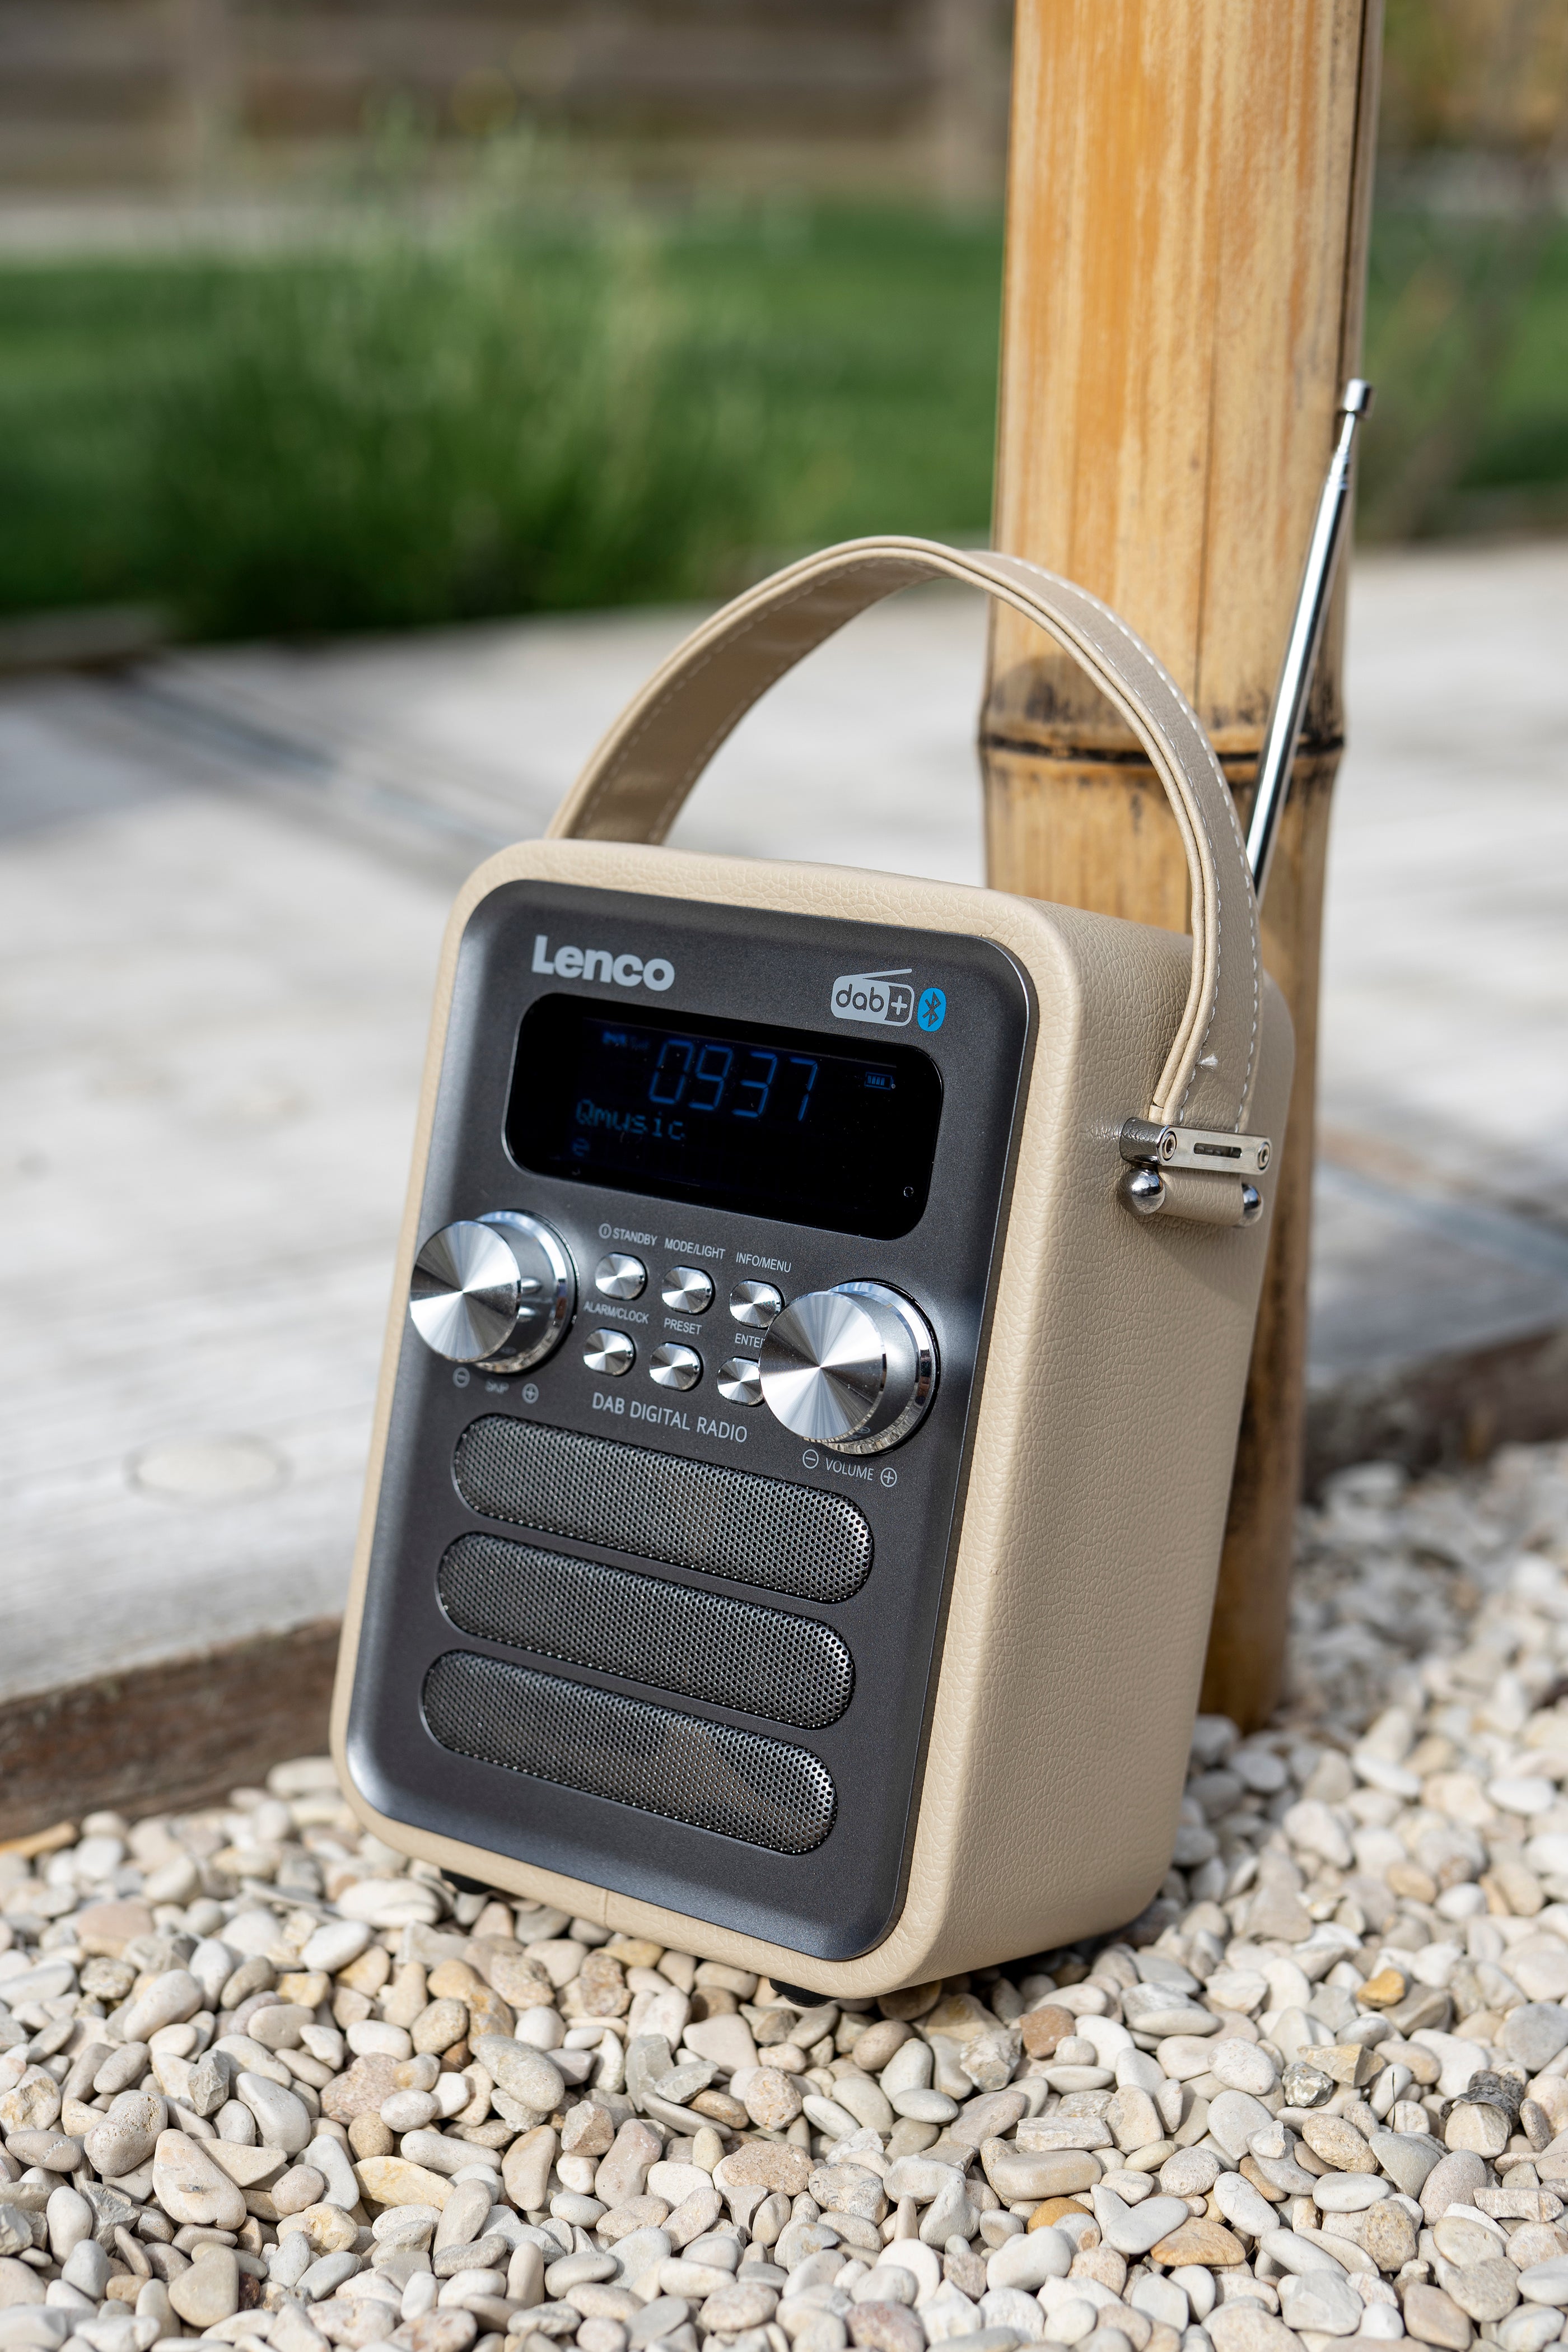 Radios from Lenco! Now in the official shop